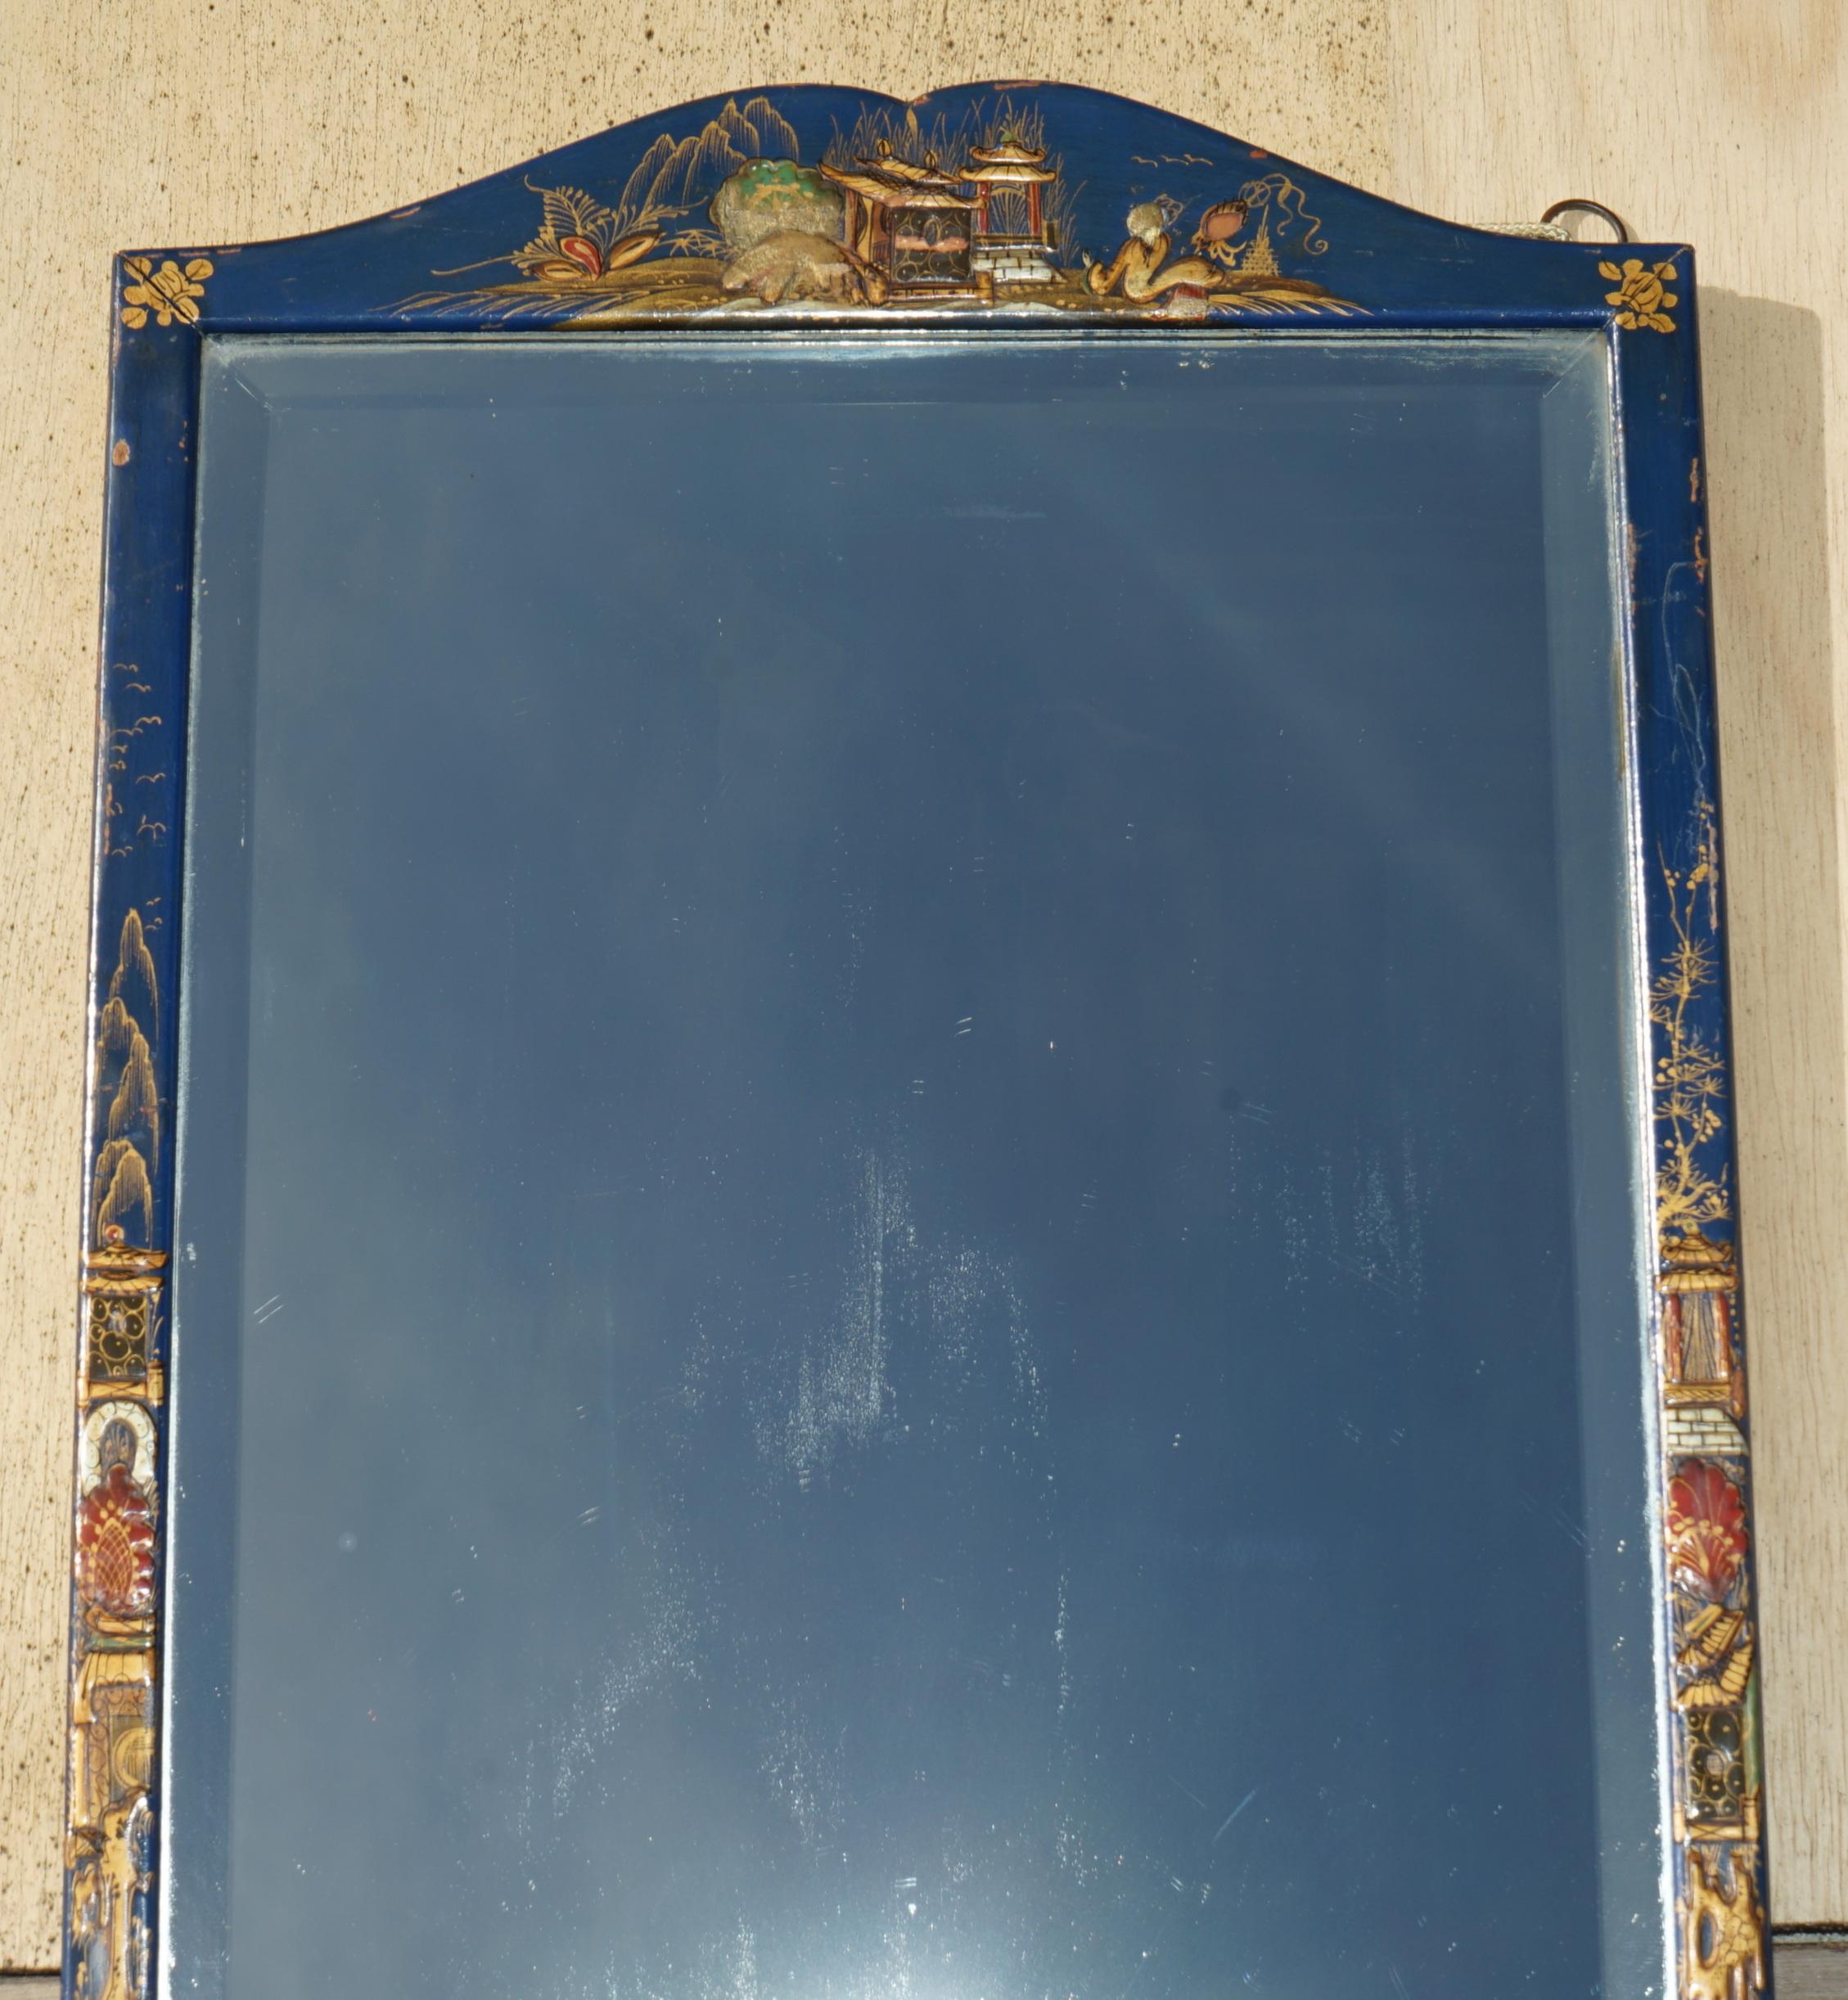 Royal House Antiques

Royal House Antiques is delighted to offer for sale this absolutely sublime, circa 1920's Chinese Chinoiserie wall mirror with original foxed glass plate and period painted finish

Please note the delivery fee listed is just a